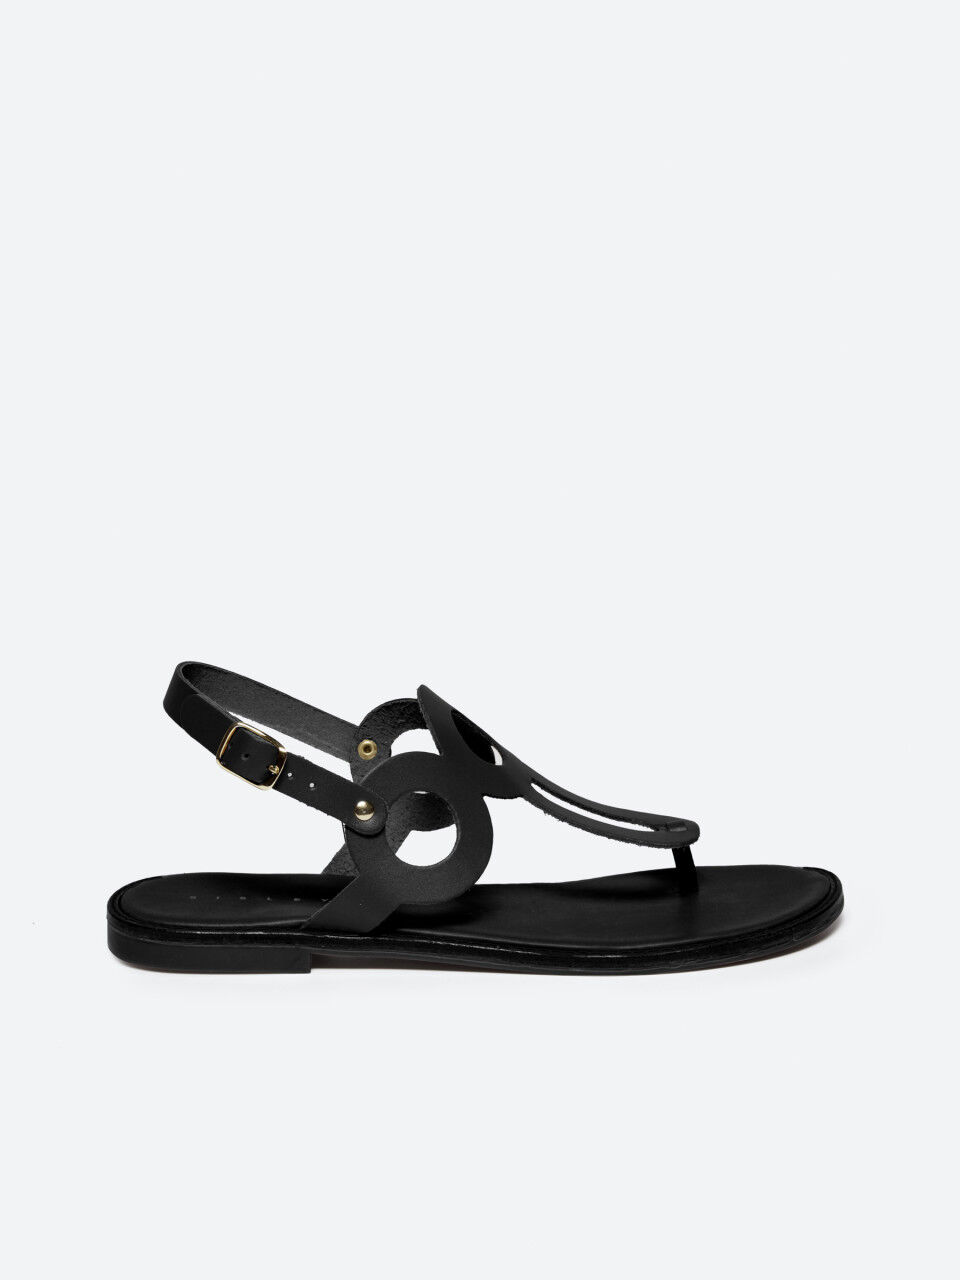 100% leather sandals